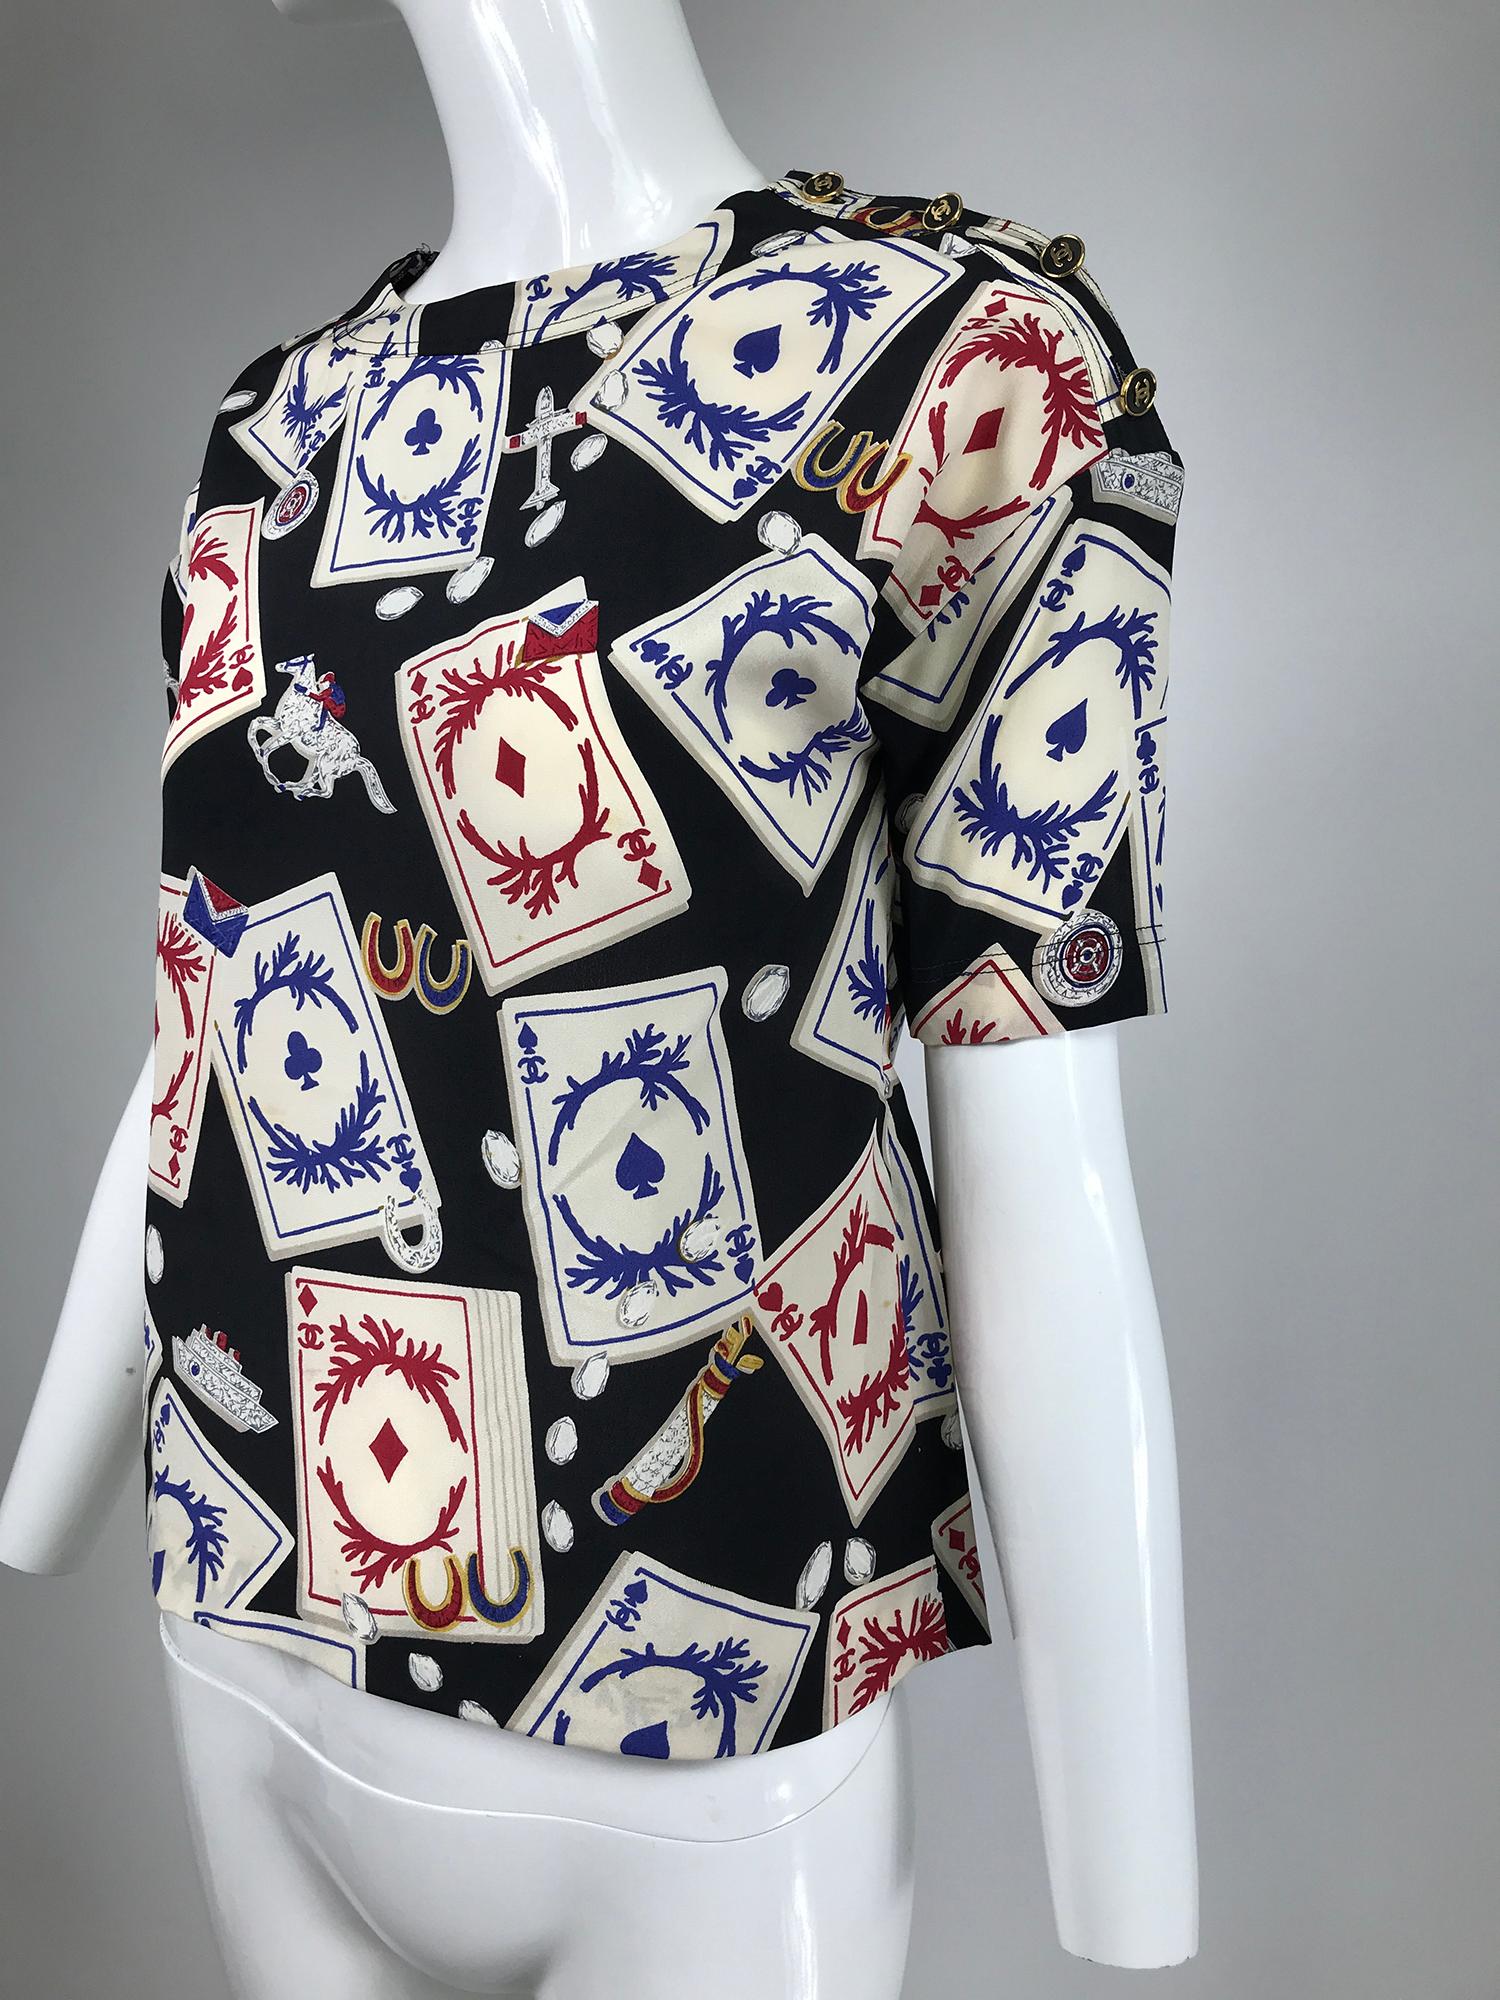 Chanel rare vintage playing cards silk blouse 1995. Jewel neckline blouse closes at the shoulder side with Chanel buttons, short sleeves, slim straight cut to hem. In very good pre owned condition, this blouse has been custom fitted for the previous